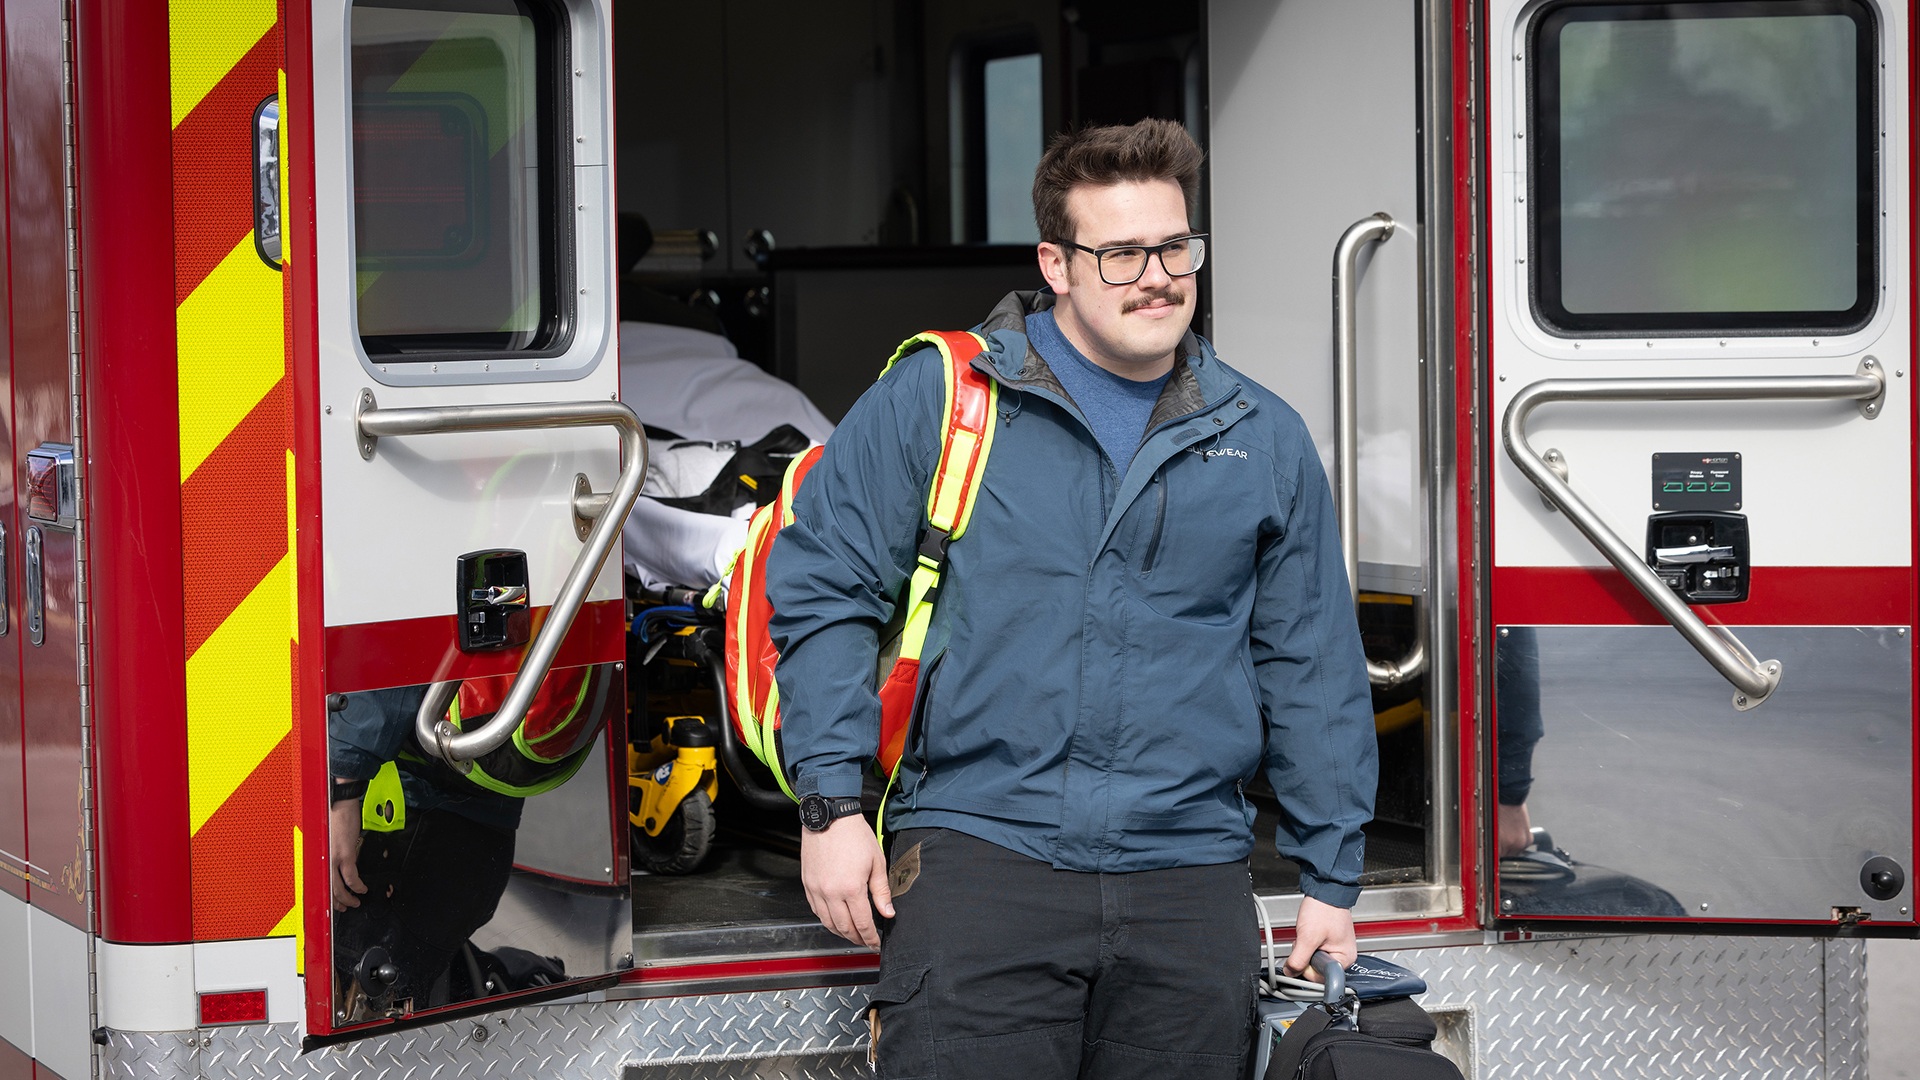 A person stands at the rear of an ambulance.